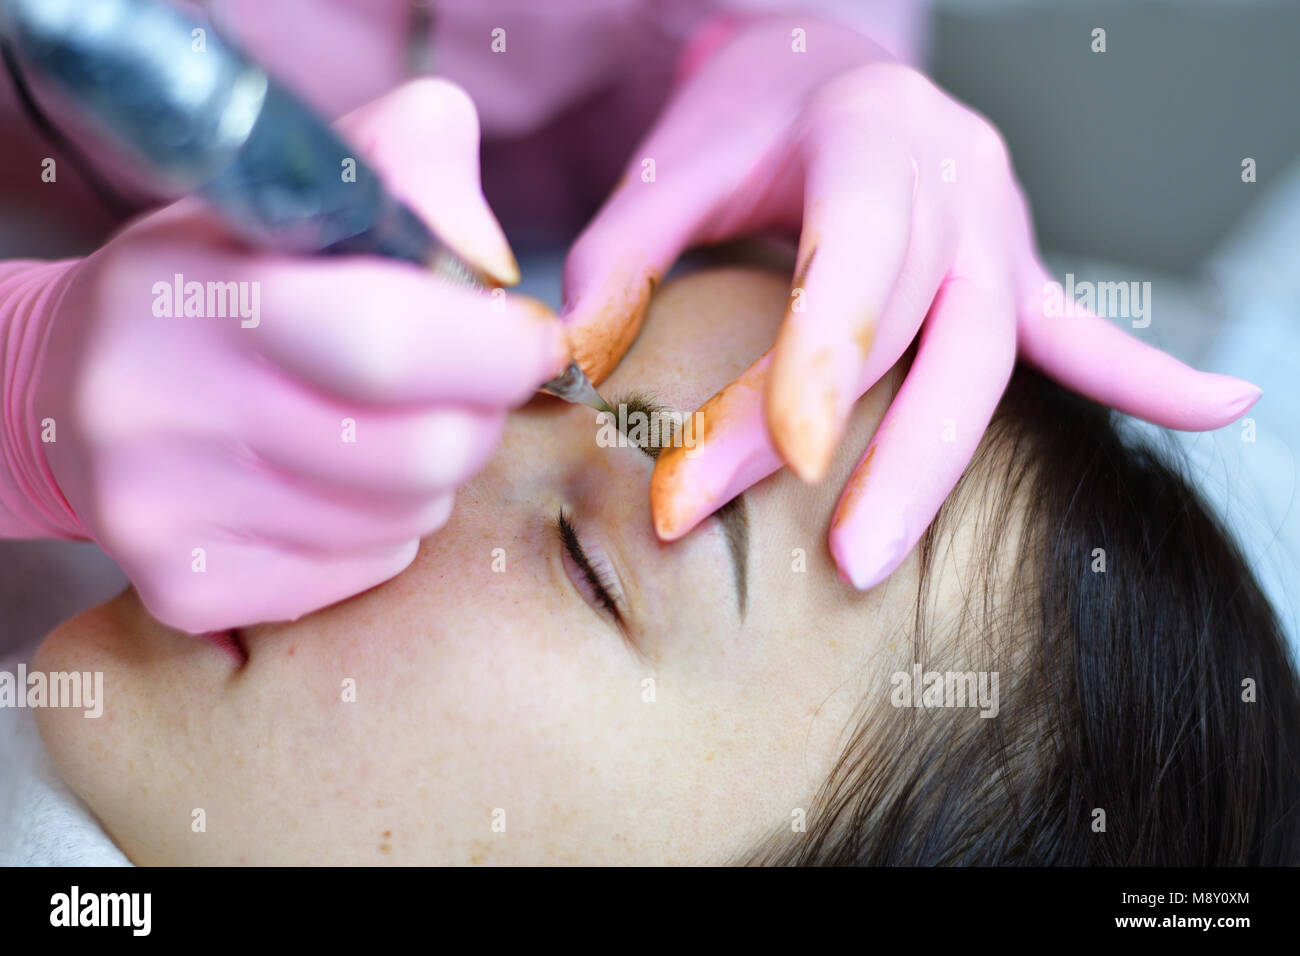 The master makes eyebrow tattoos for a young girl. Stock Photo